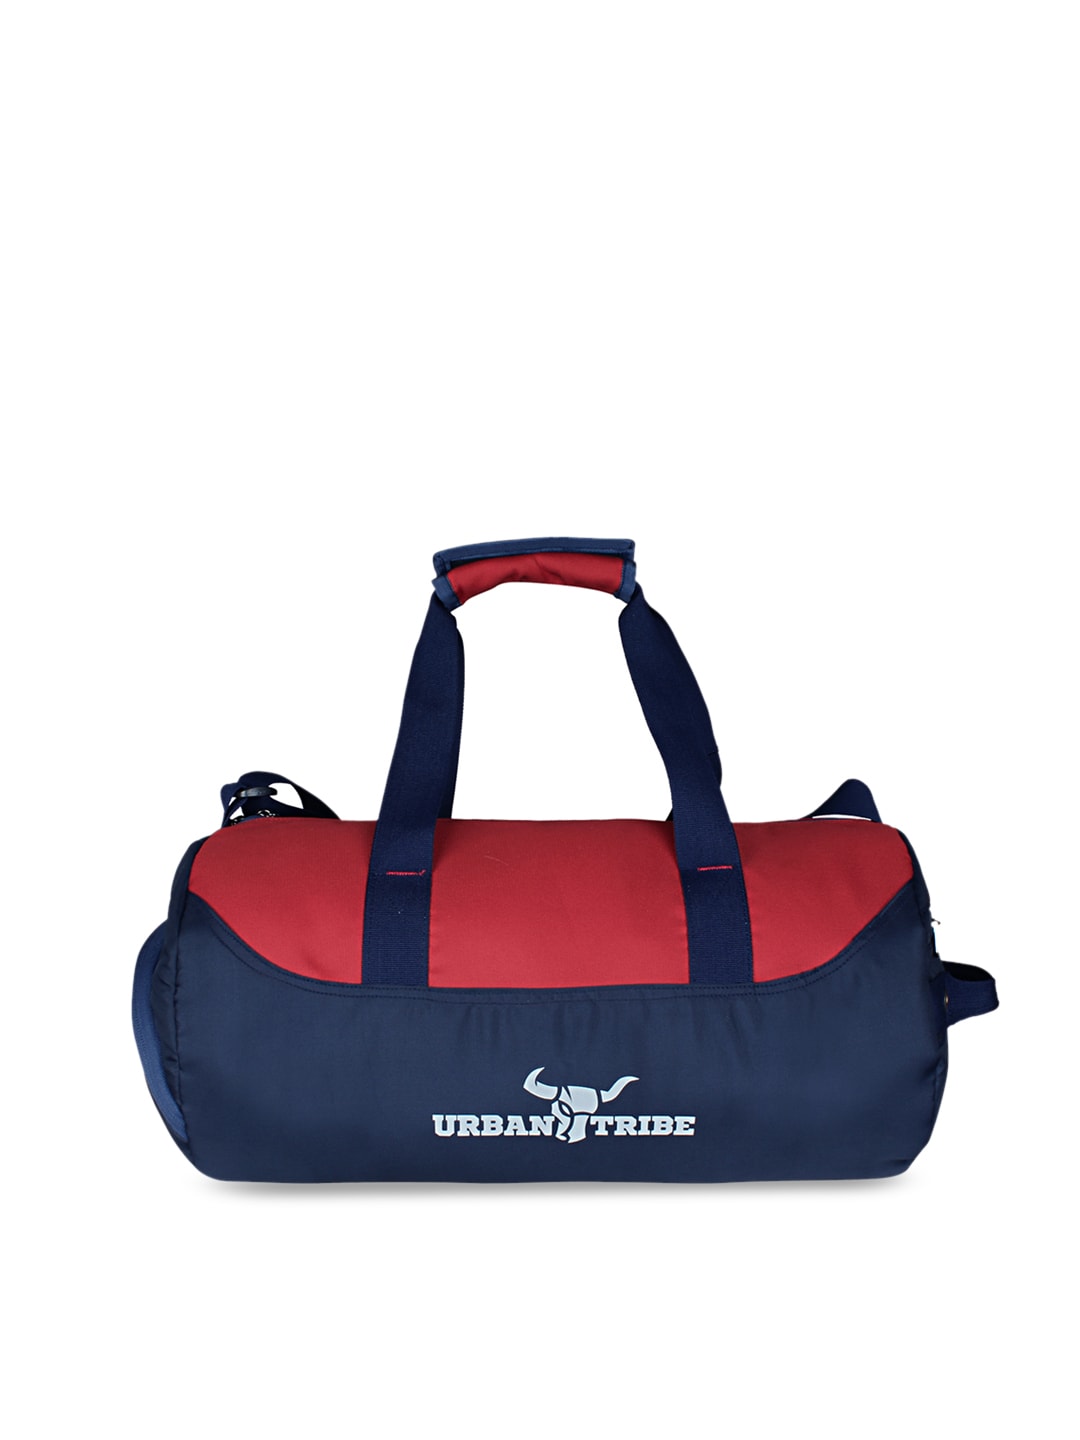 Urban Tribe Bolt Navy Red Gym Duffel Bag Price in India